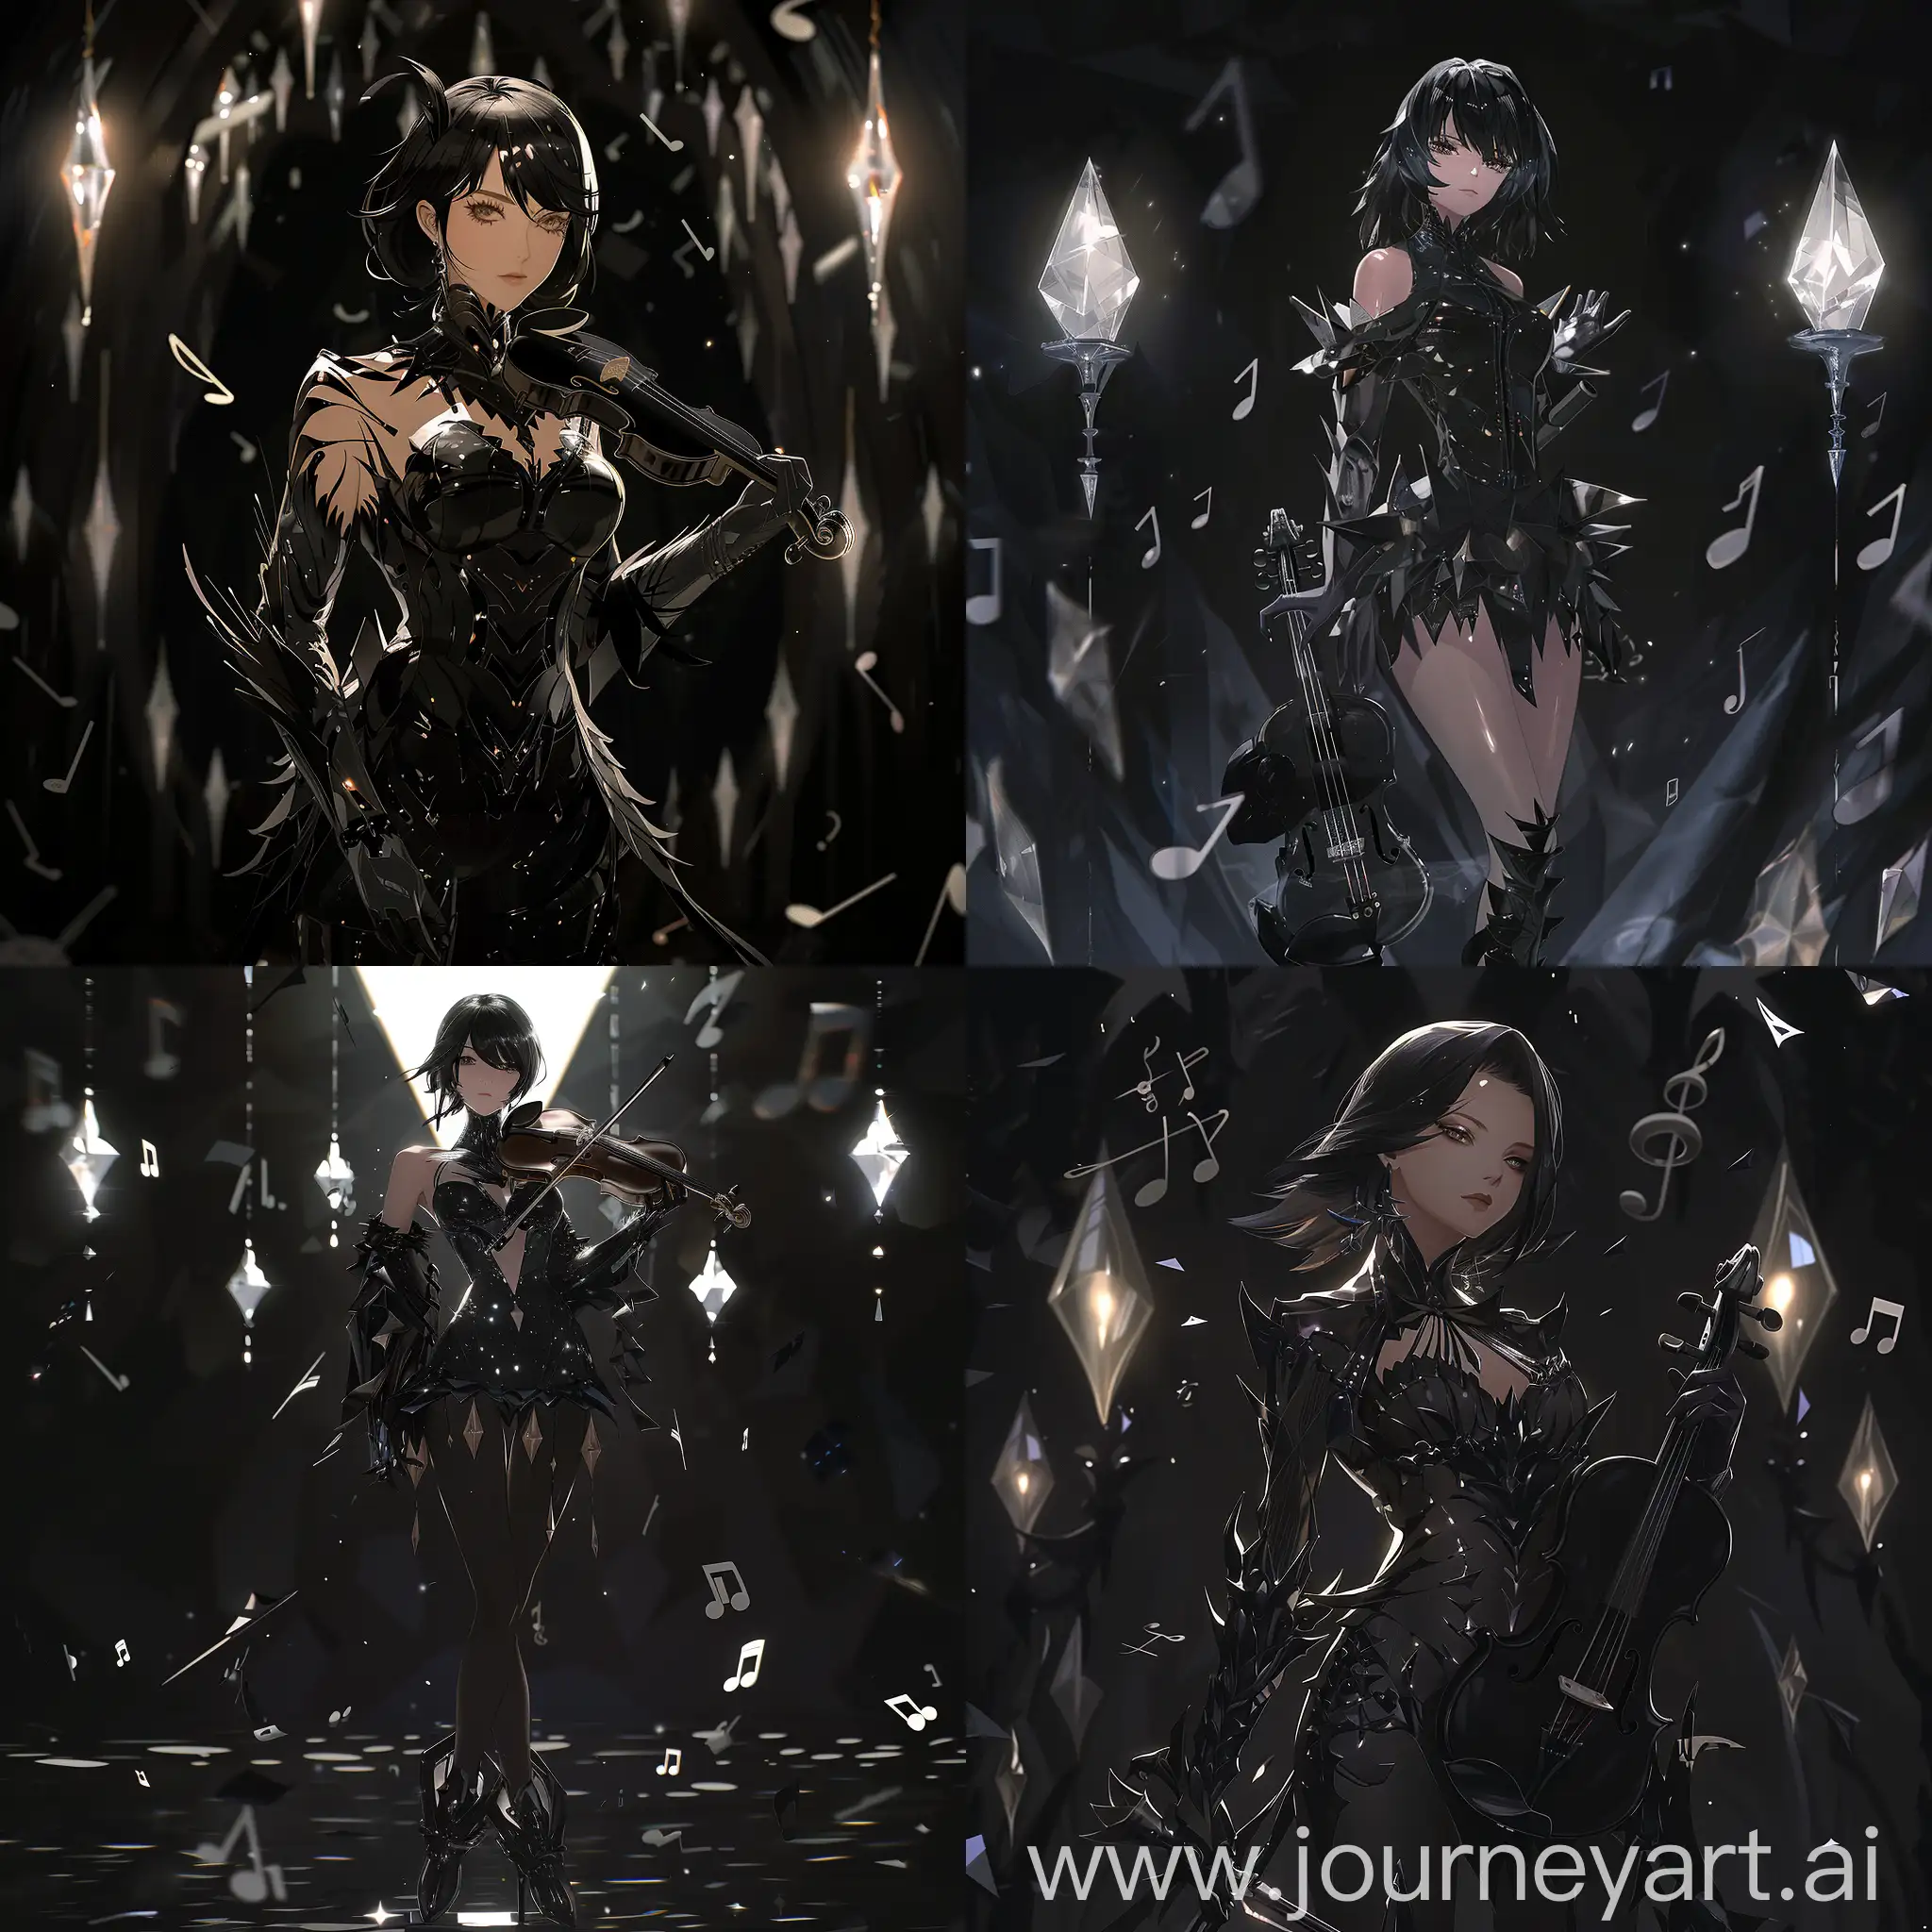 Create an artwork depicting Albedo from Overlord in a striking pose against a dark background. She is adorned in a meticulously designed black outfit with sharp, intricate details. The play of subtle light on the black surface adds an air of mystery and allure.  Albedo stands tall, gripping a violin, gazing into the distance with passionate eyes. Soft light from crystal lamps illuminates her flawless face, accentuating the alluring contours and distinctive beauty of this NPC. Musical notes seamlessly blend with the surroundings, creating an atmosphere of sophistication and mystique."